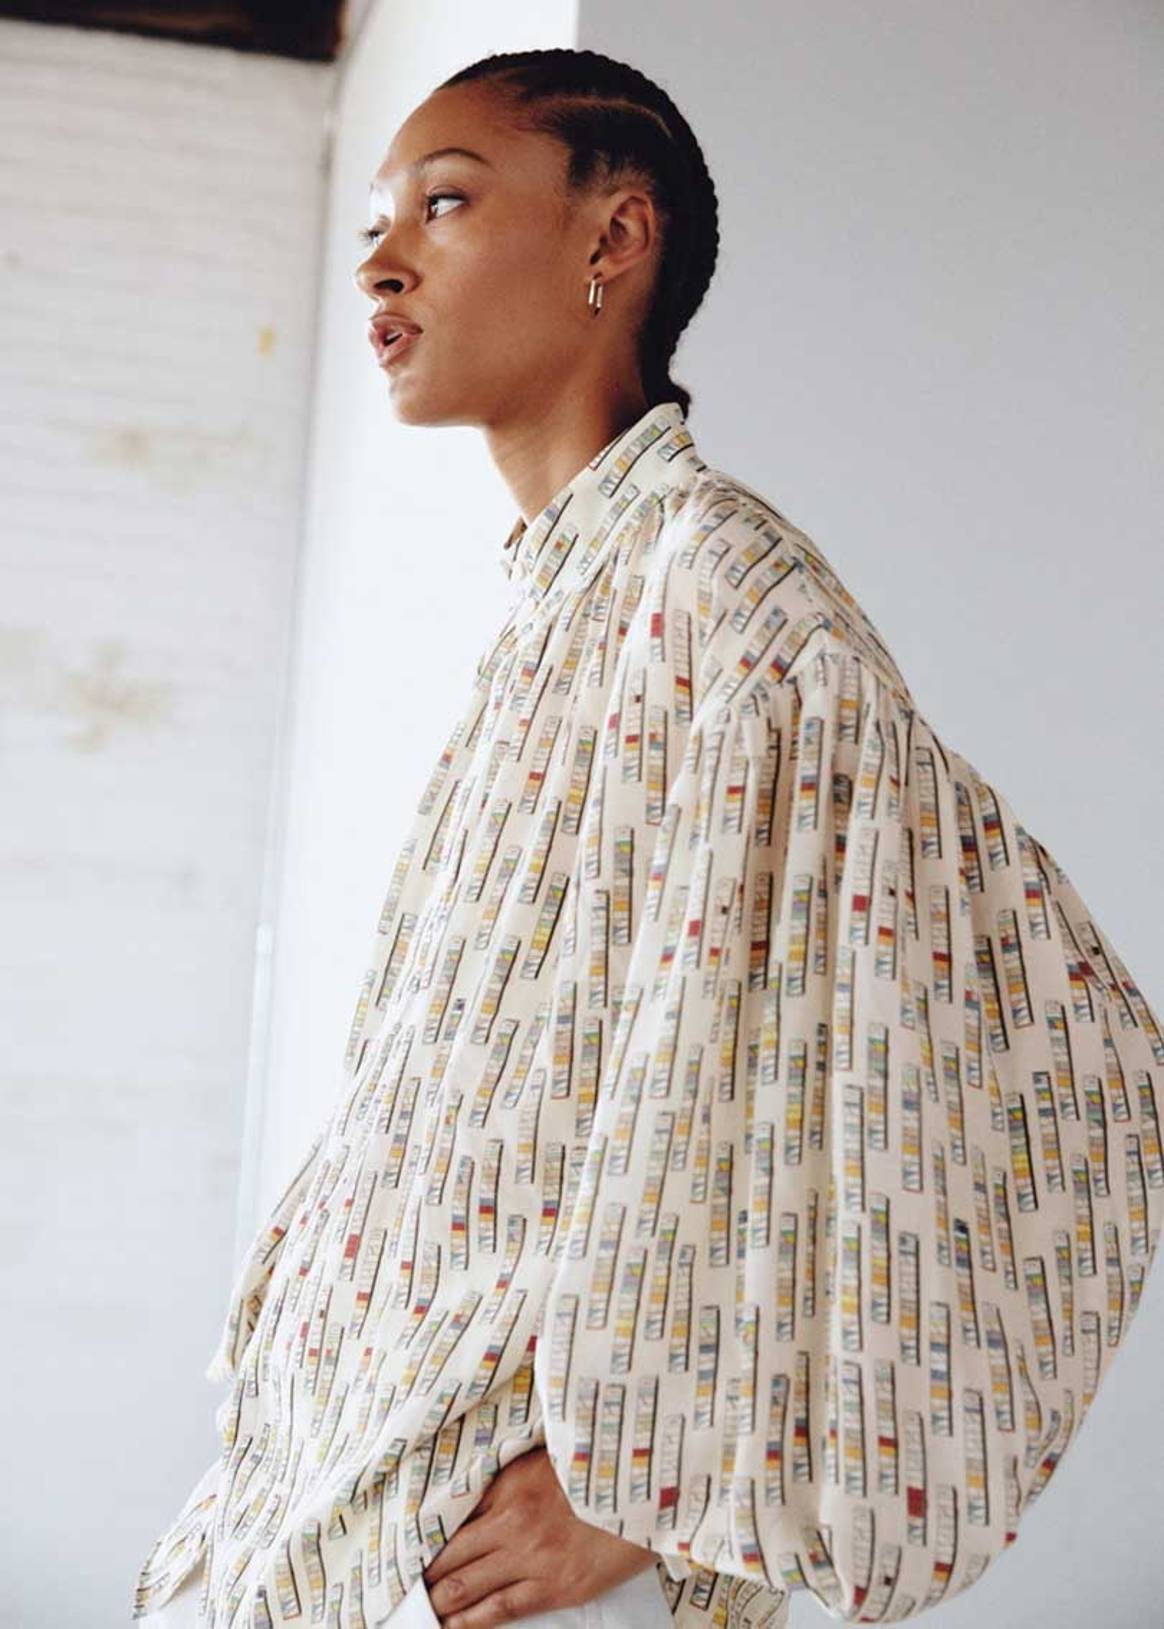 & Other Stories turns data points into a wearable collection